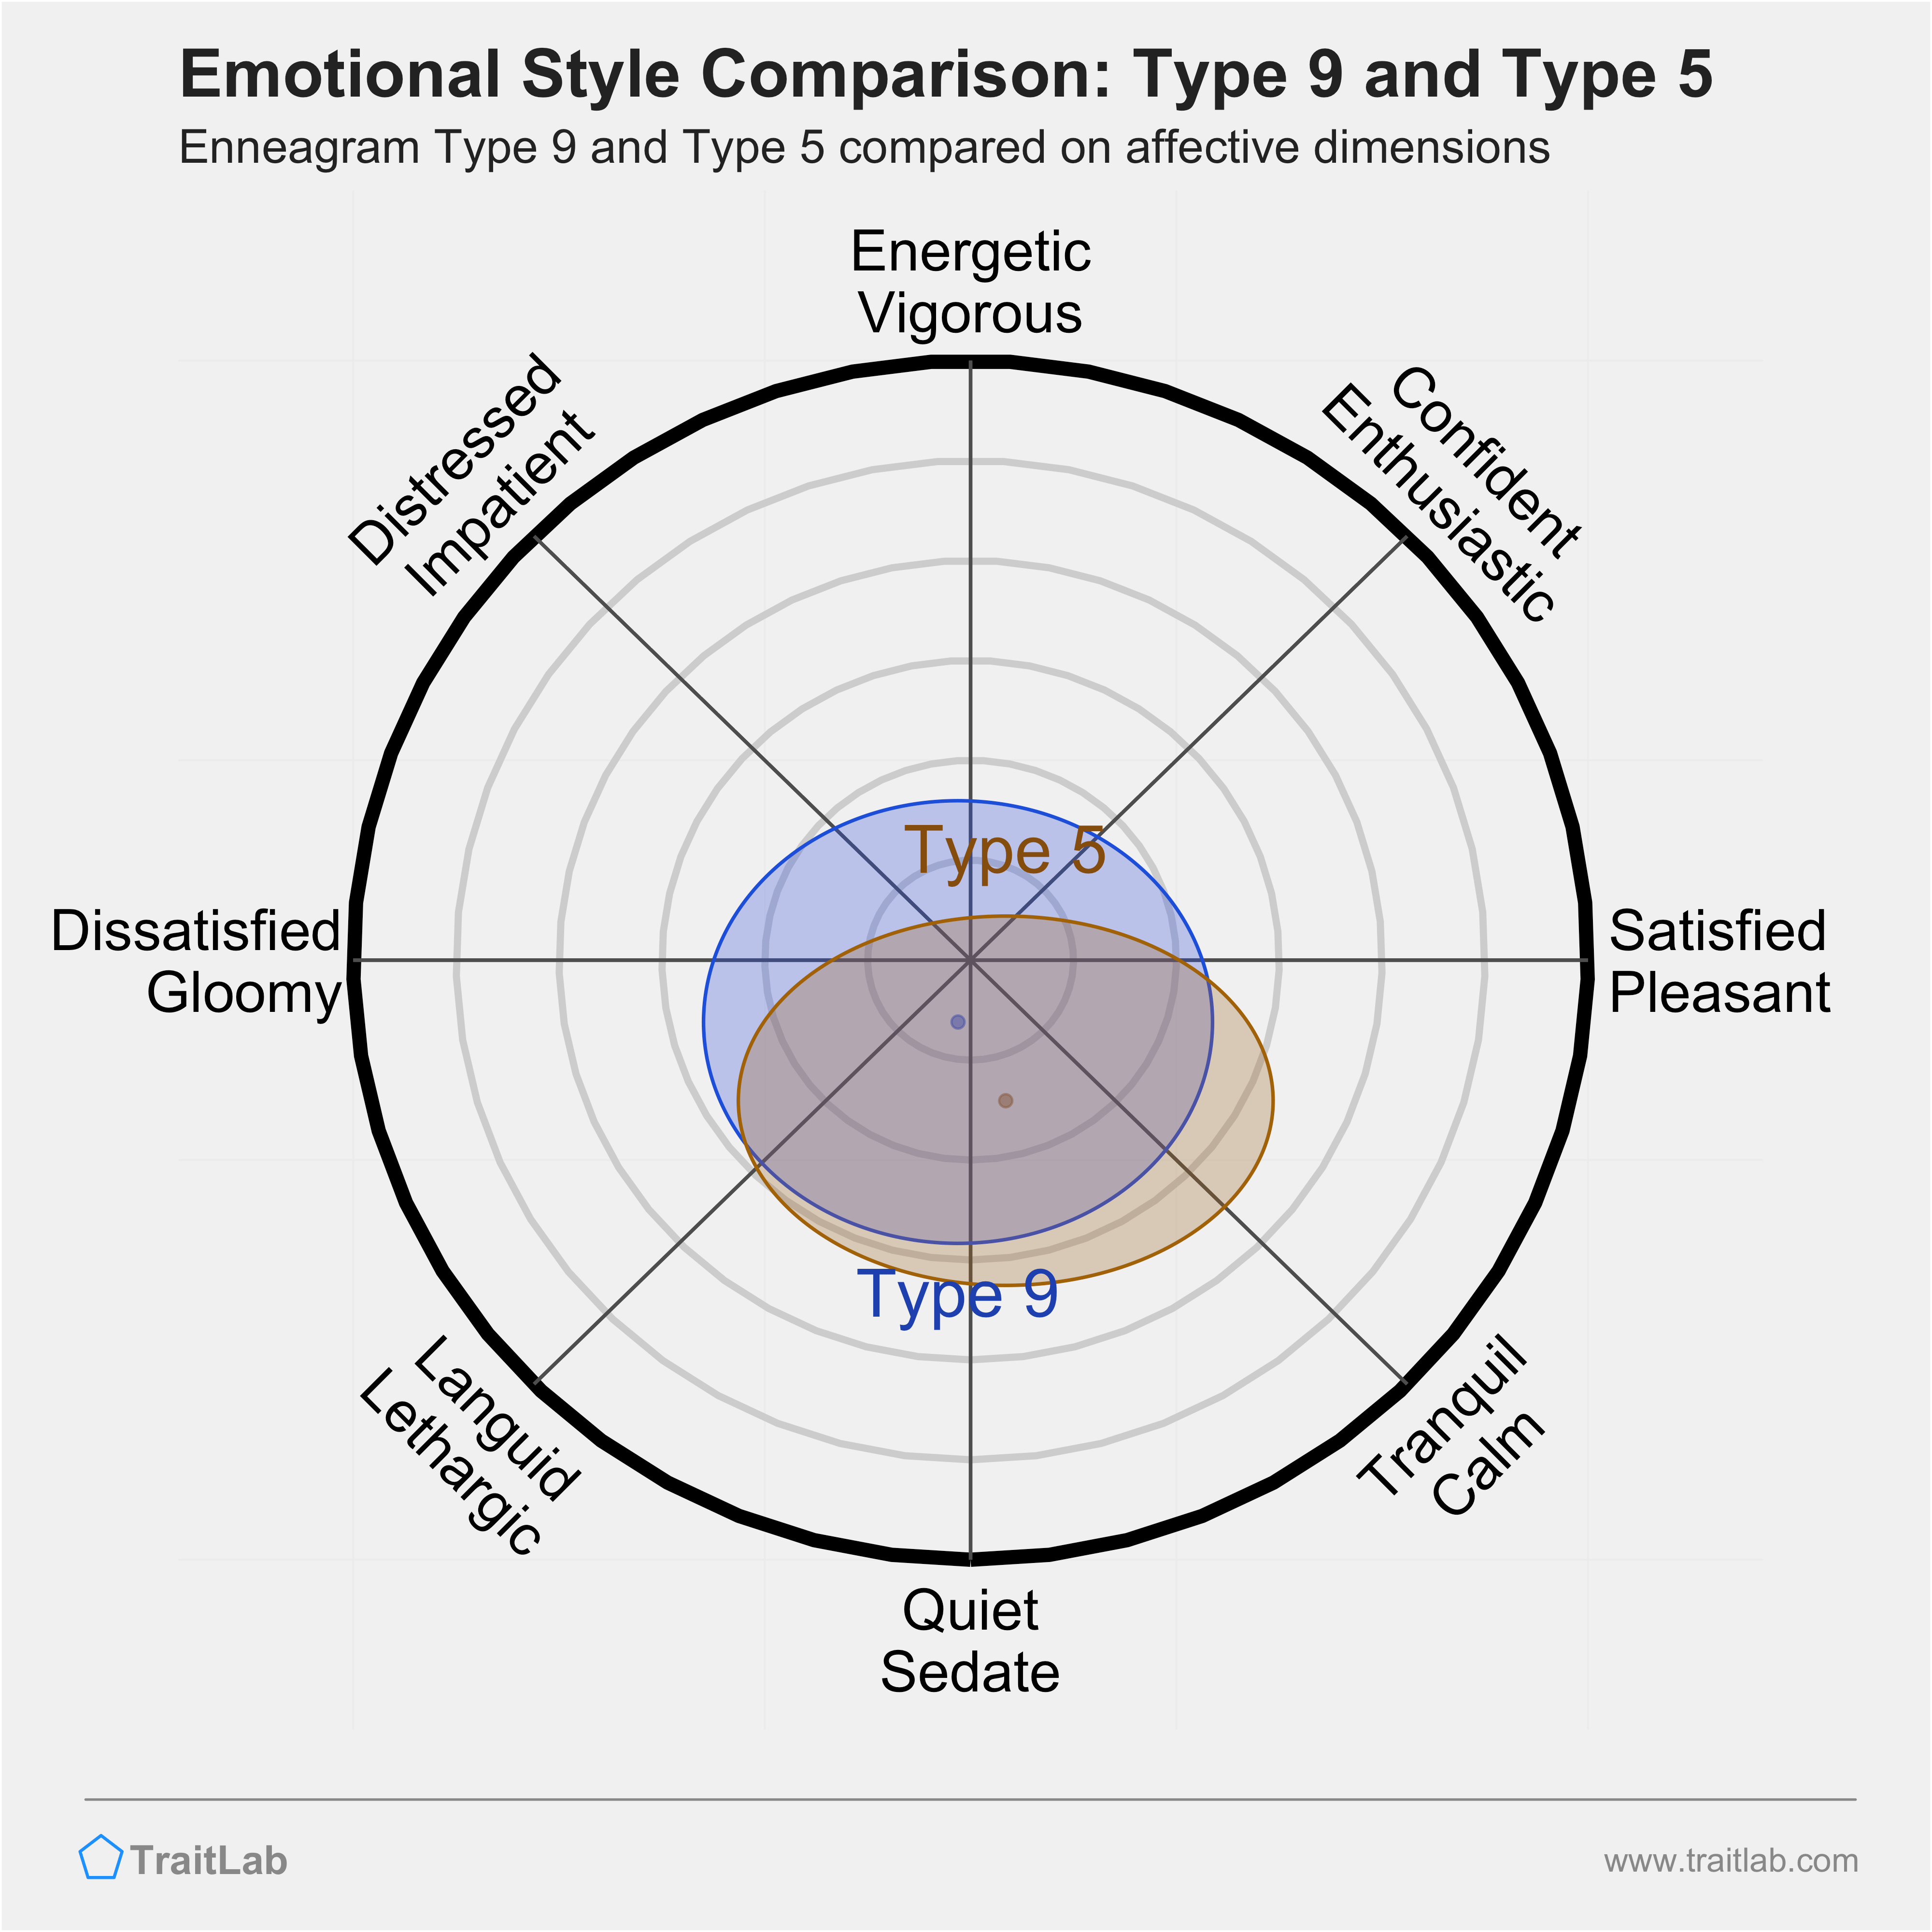 Type 9 and Type 5 comparison across emotional (affective) dimensions